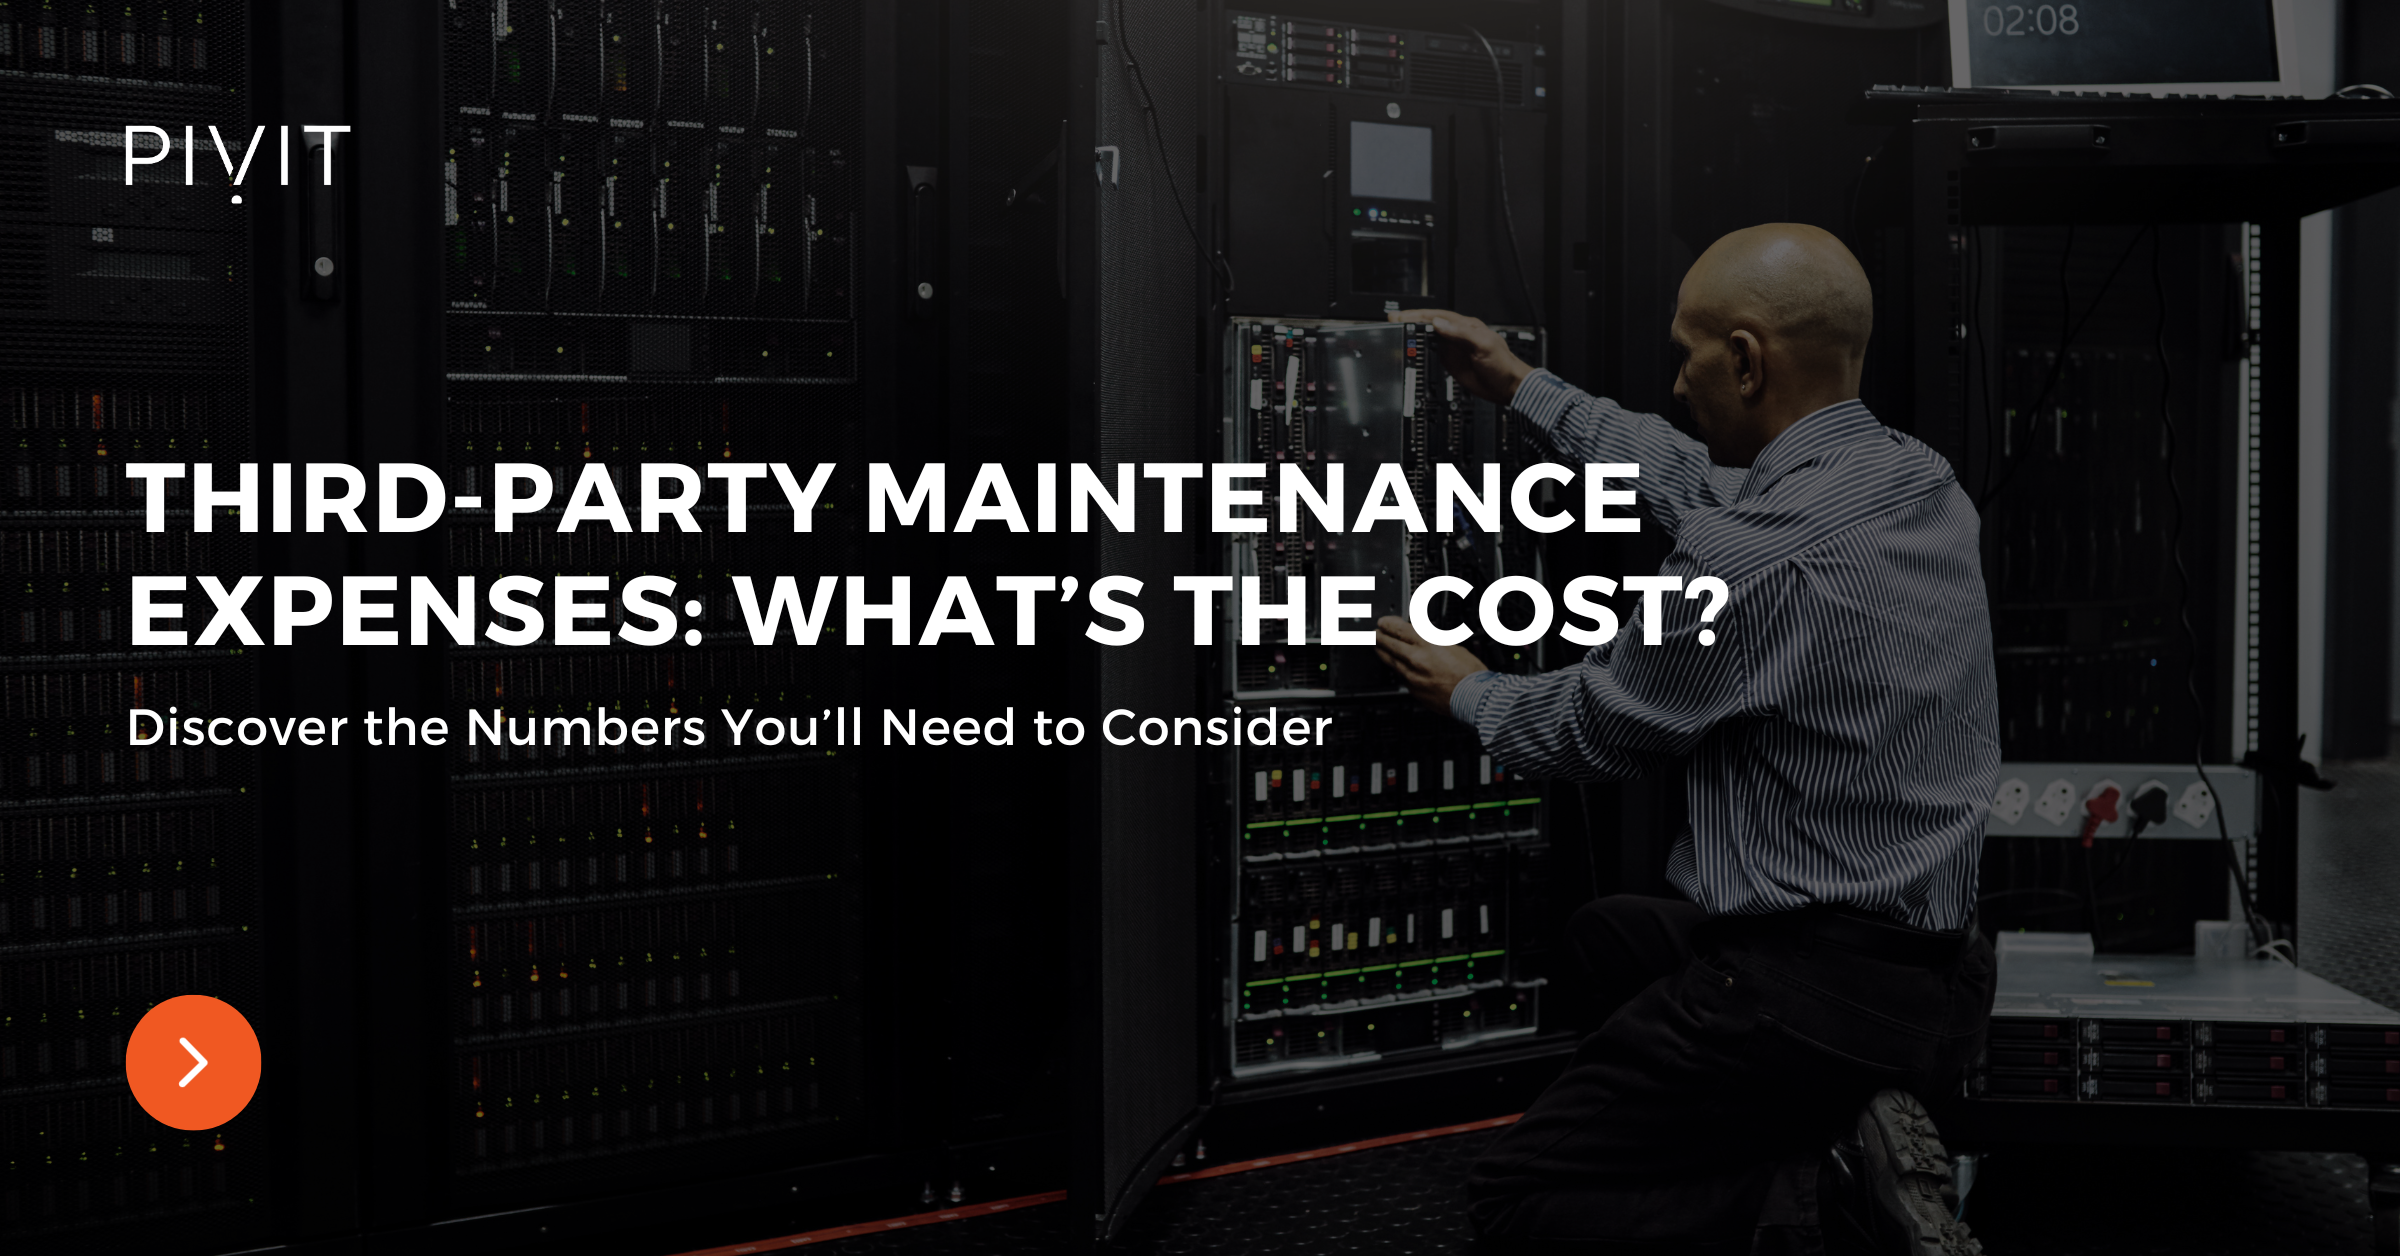 Third-Party Maintenance Expenses: What's the Cost? - Discover the Numbers You'll Need to Consider